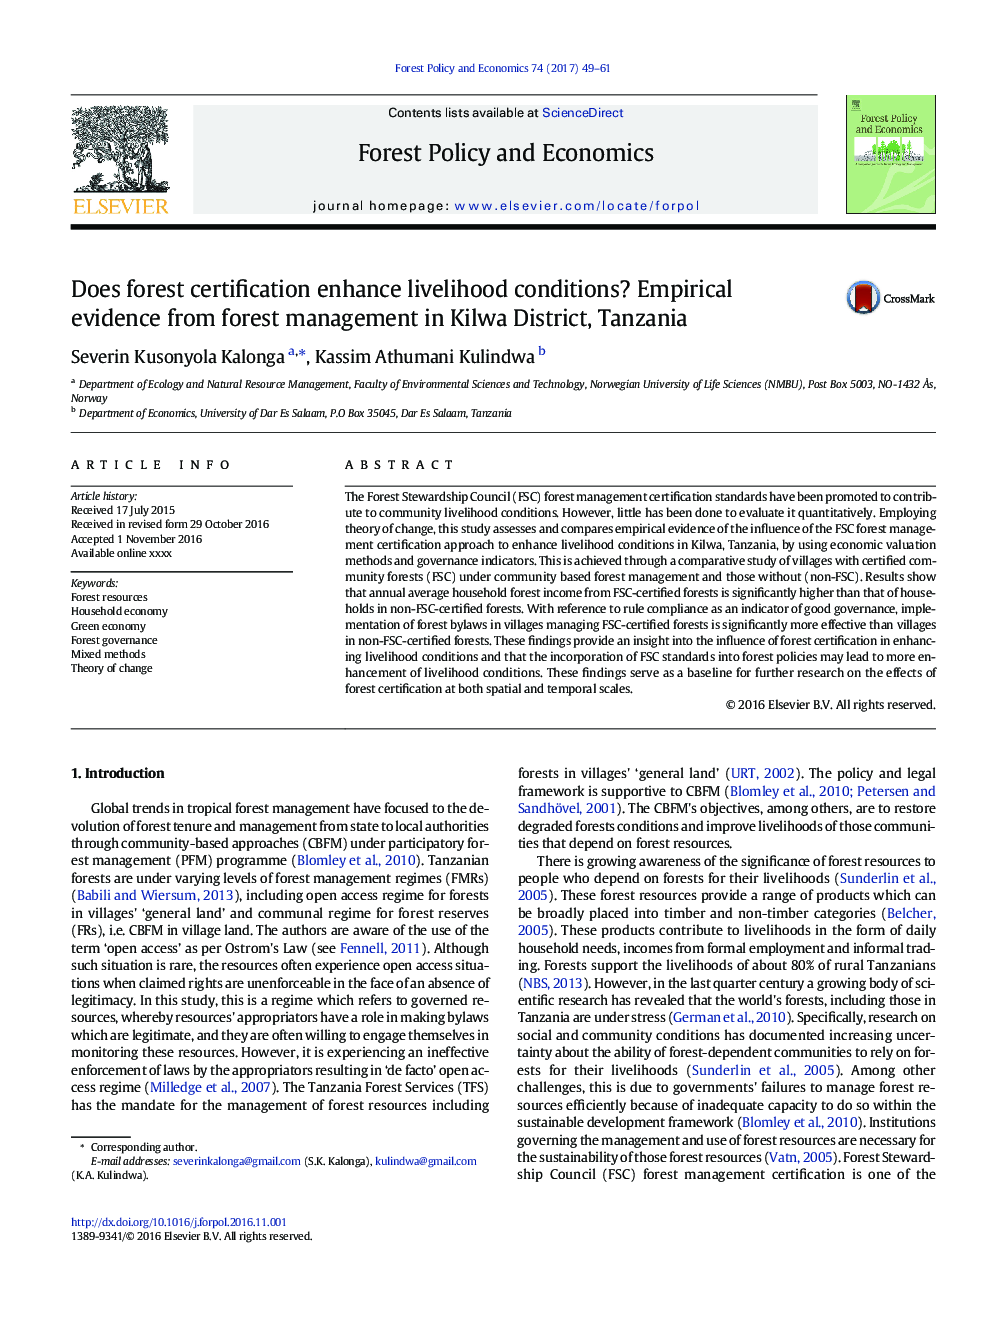 Does forest certification enhance livelihood conditions? Empirical evidence from forest management in Kilwa District, Tanzania